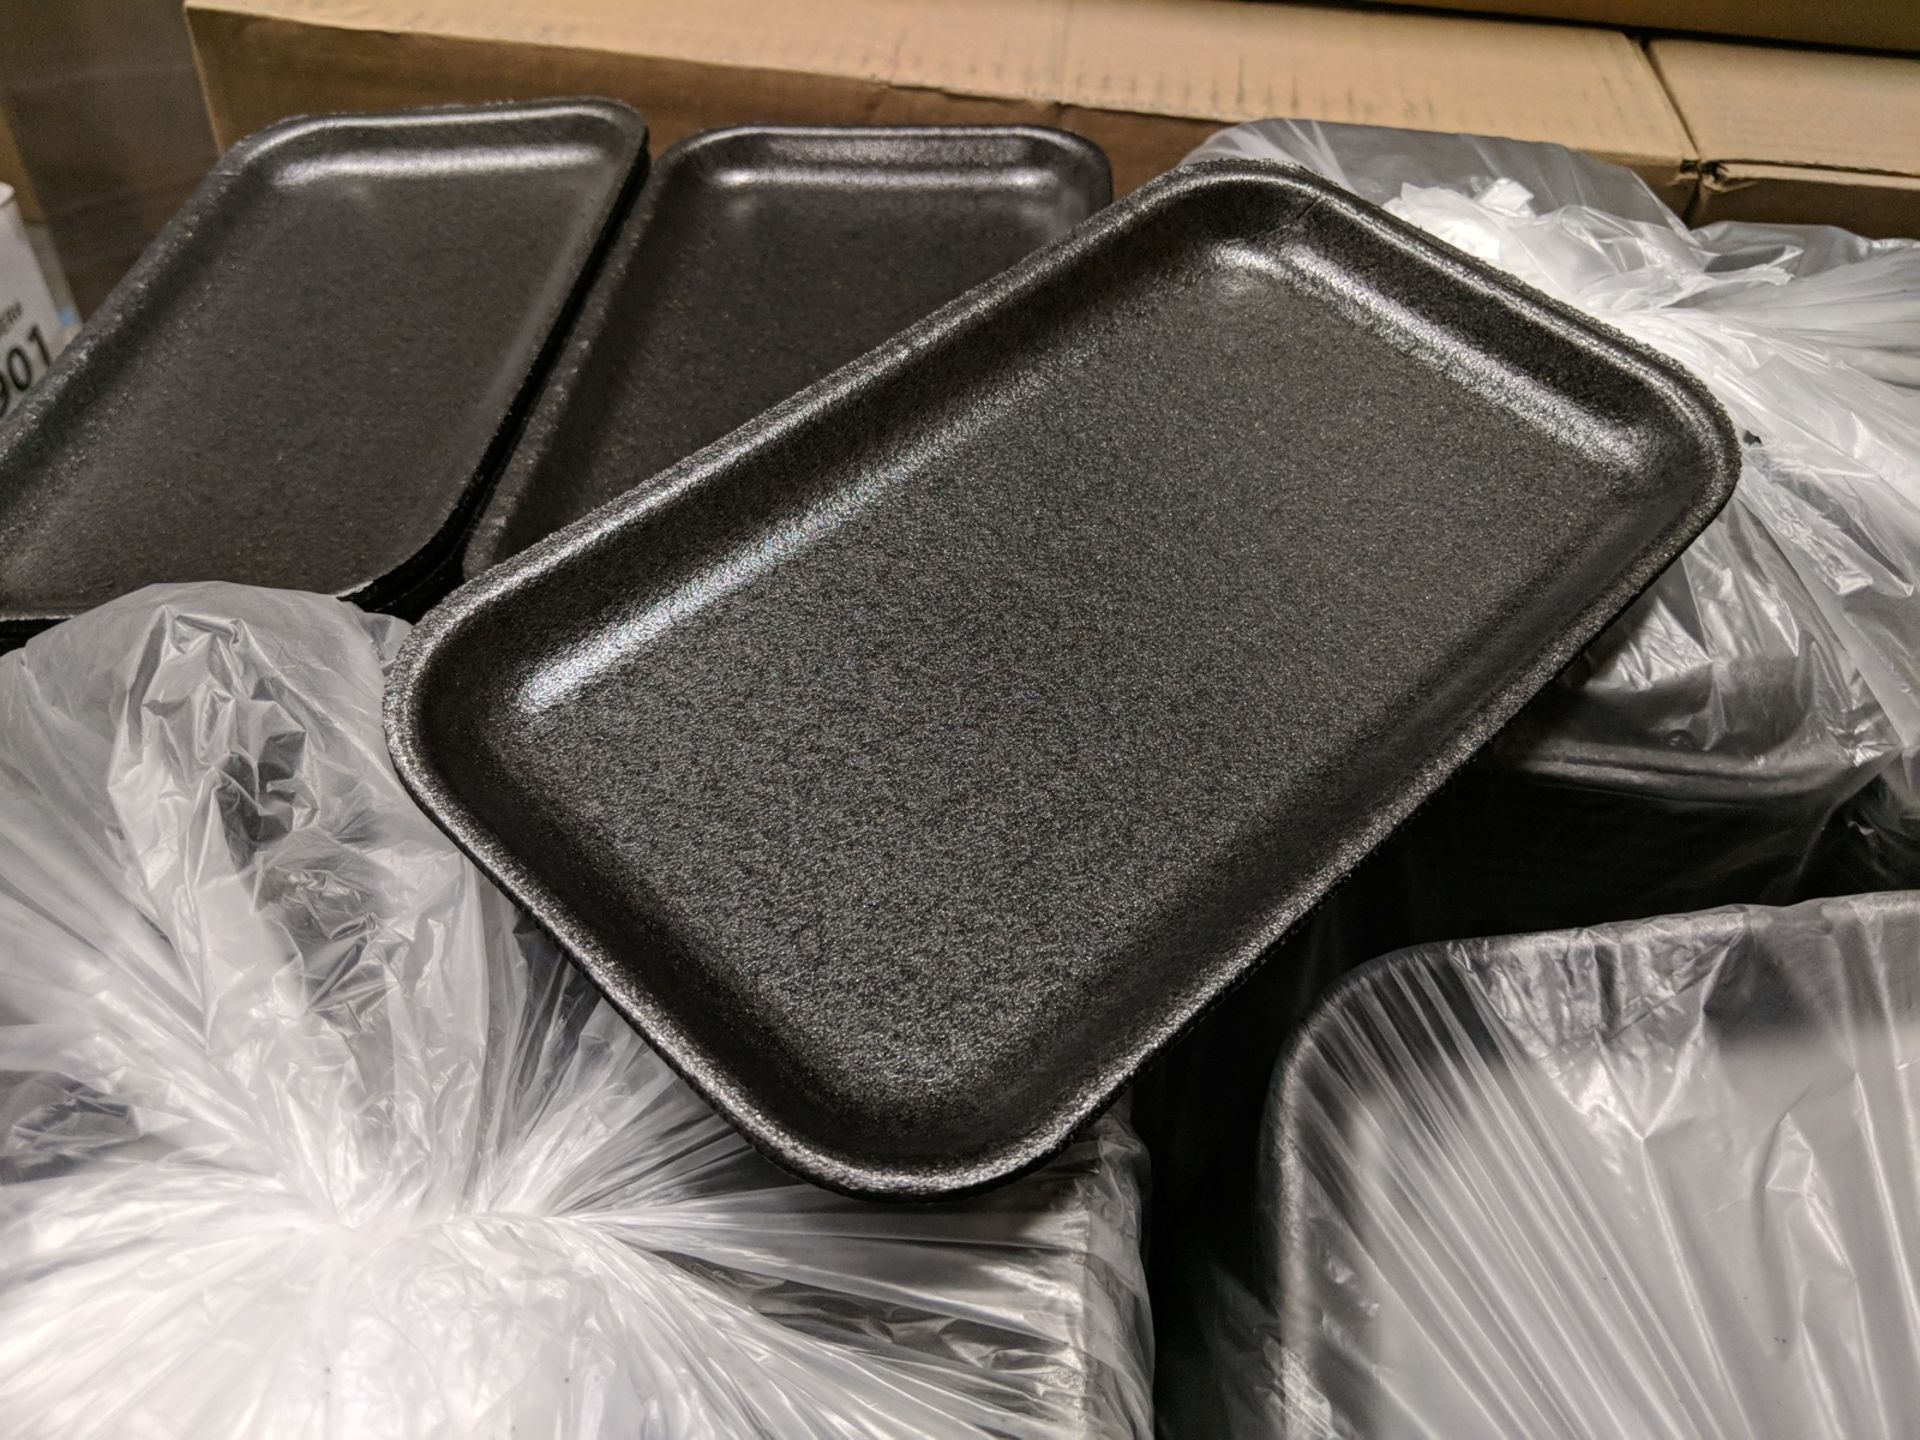 8.3" x 4.8" Foam 17S Supermarket Tray Black, Pactiv 17S - Lot of 1000 - Image 2 of 5